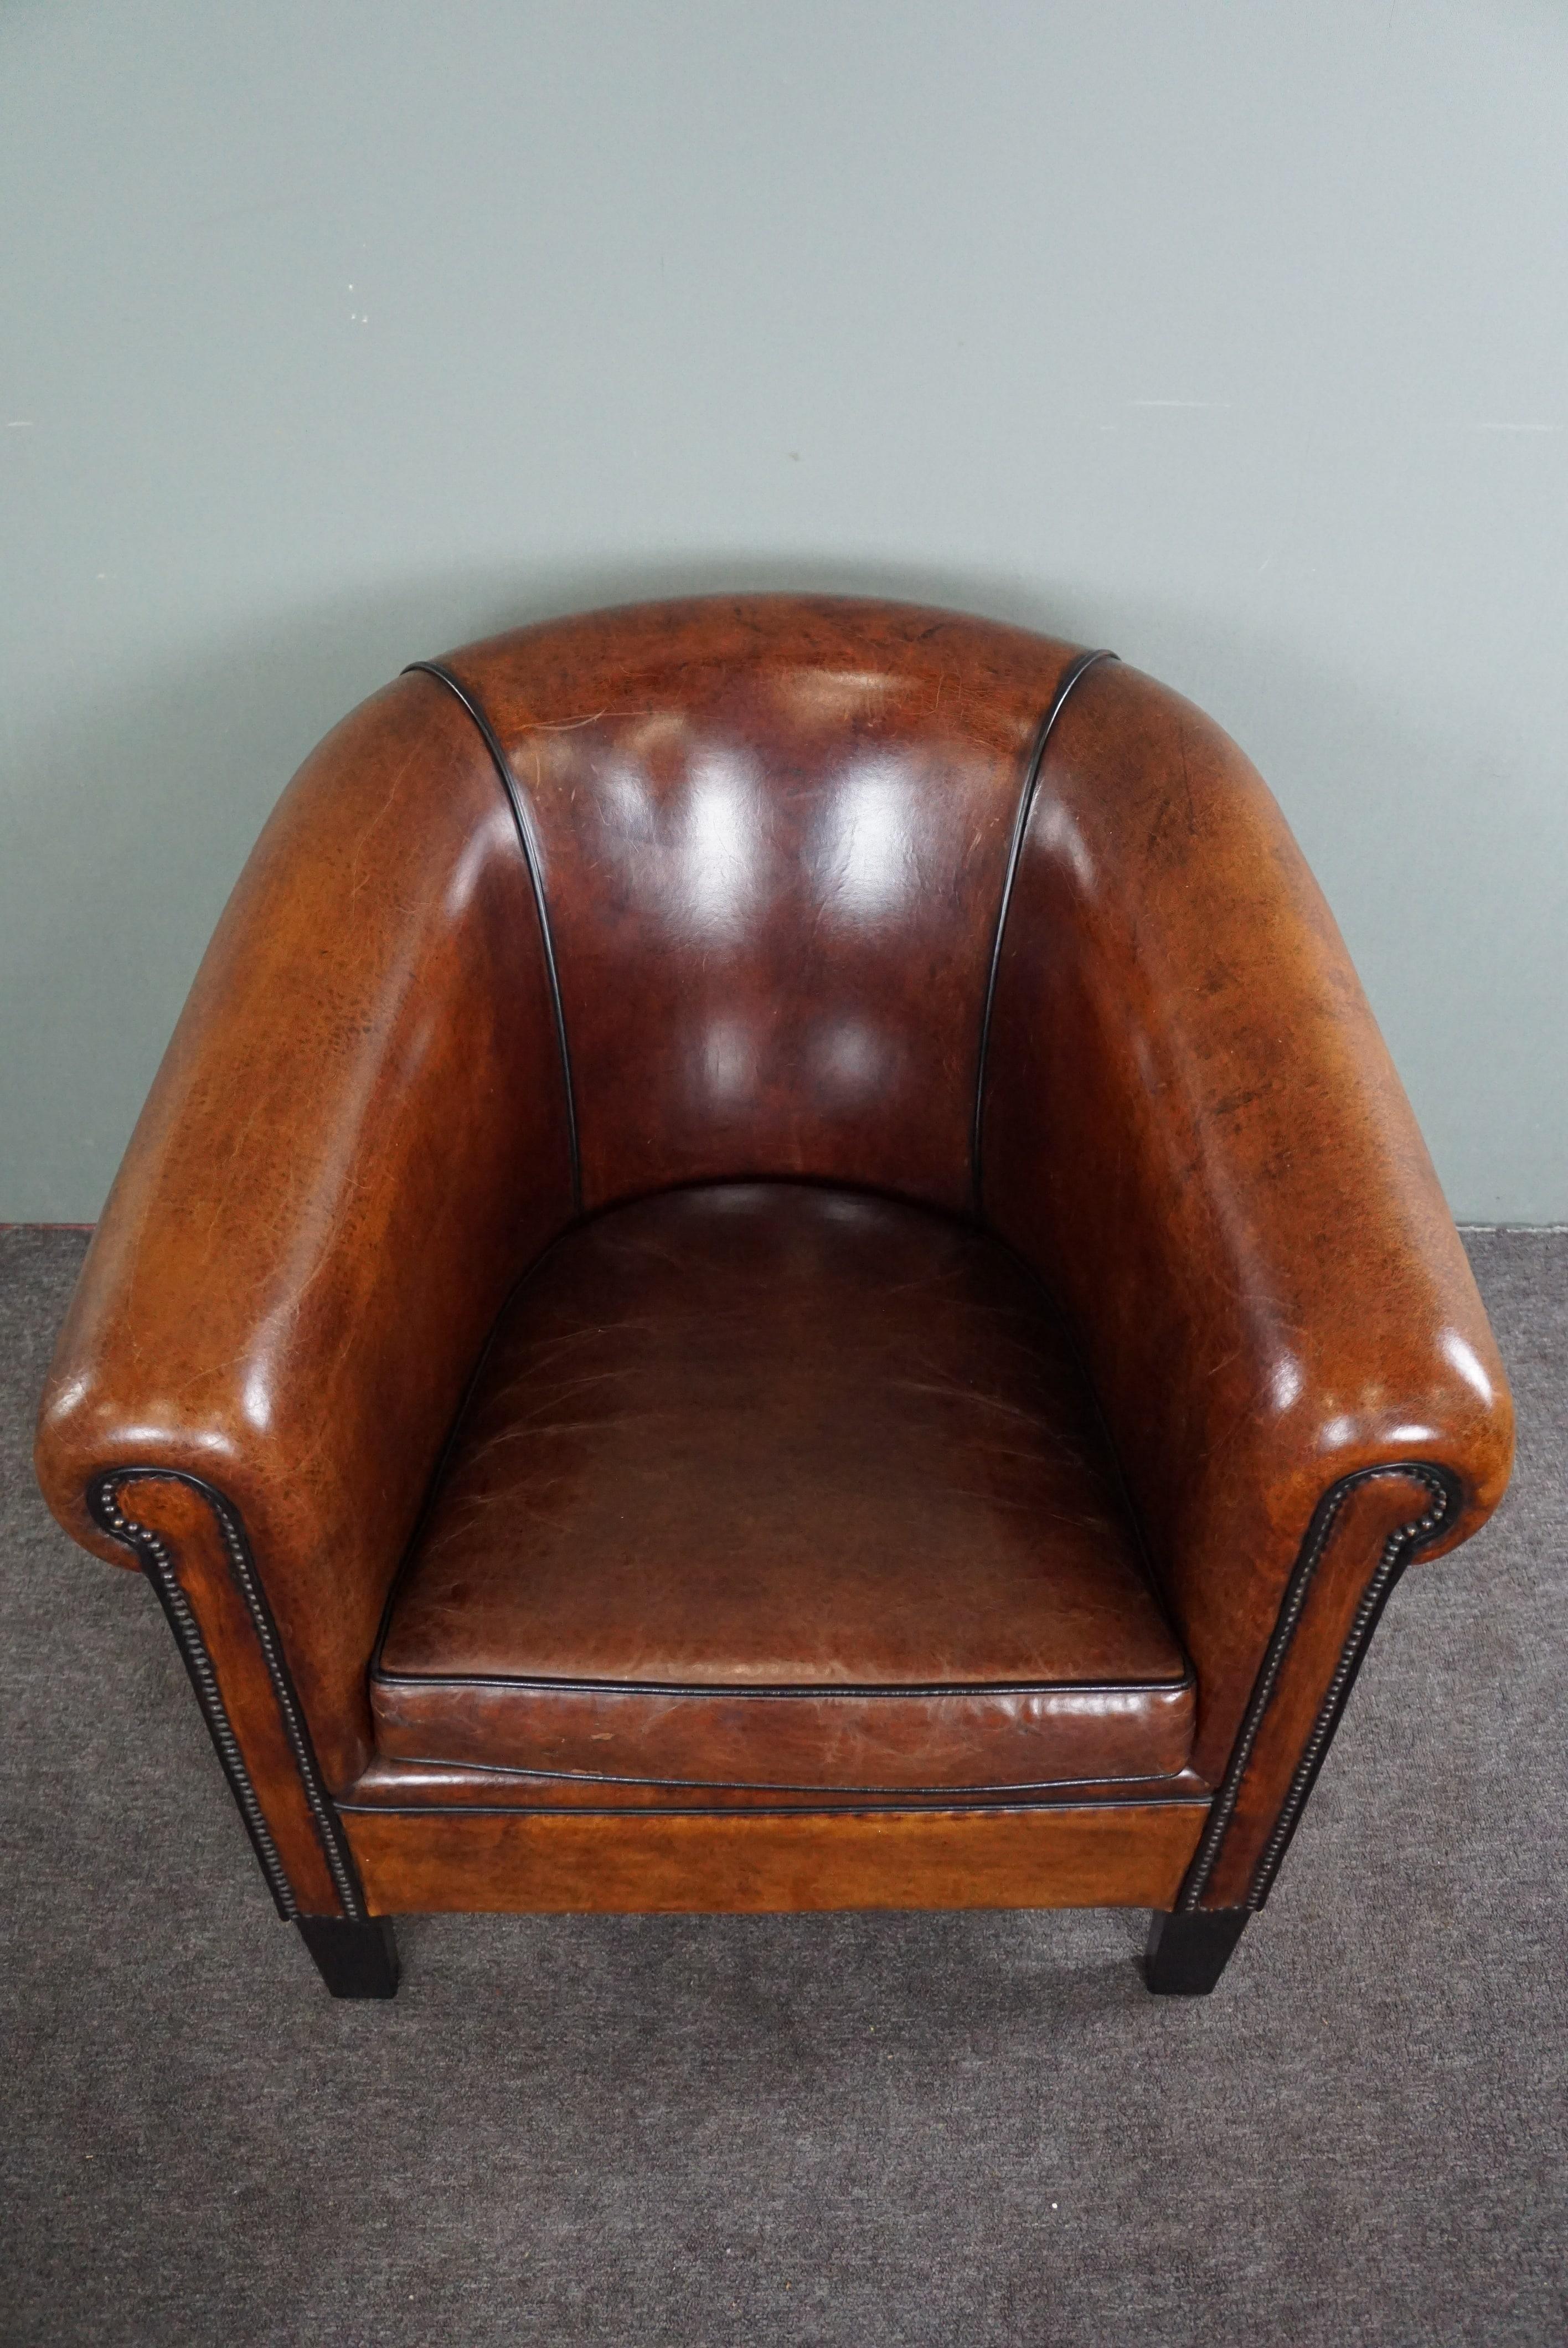 Contemporary Sheep leather club chair with black piping and decorative nails